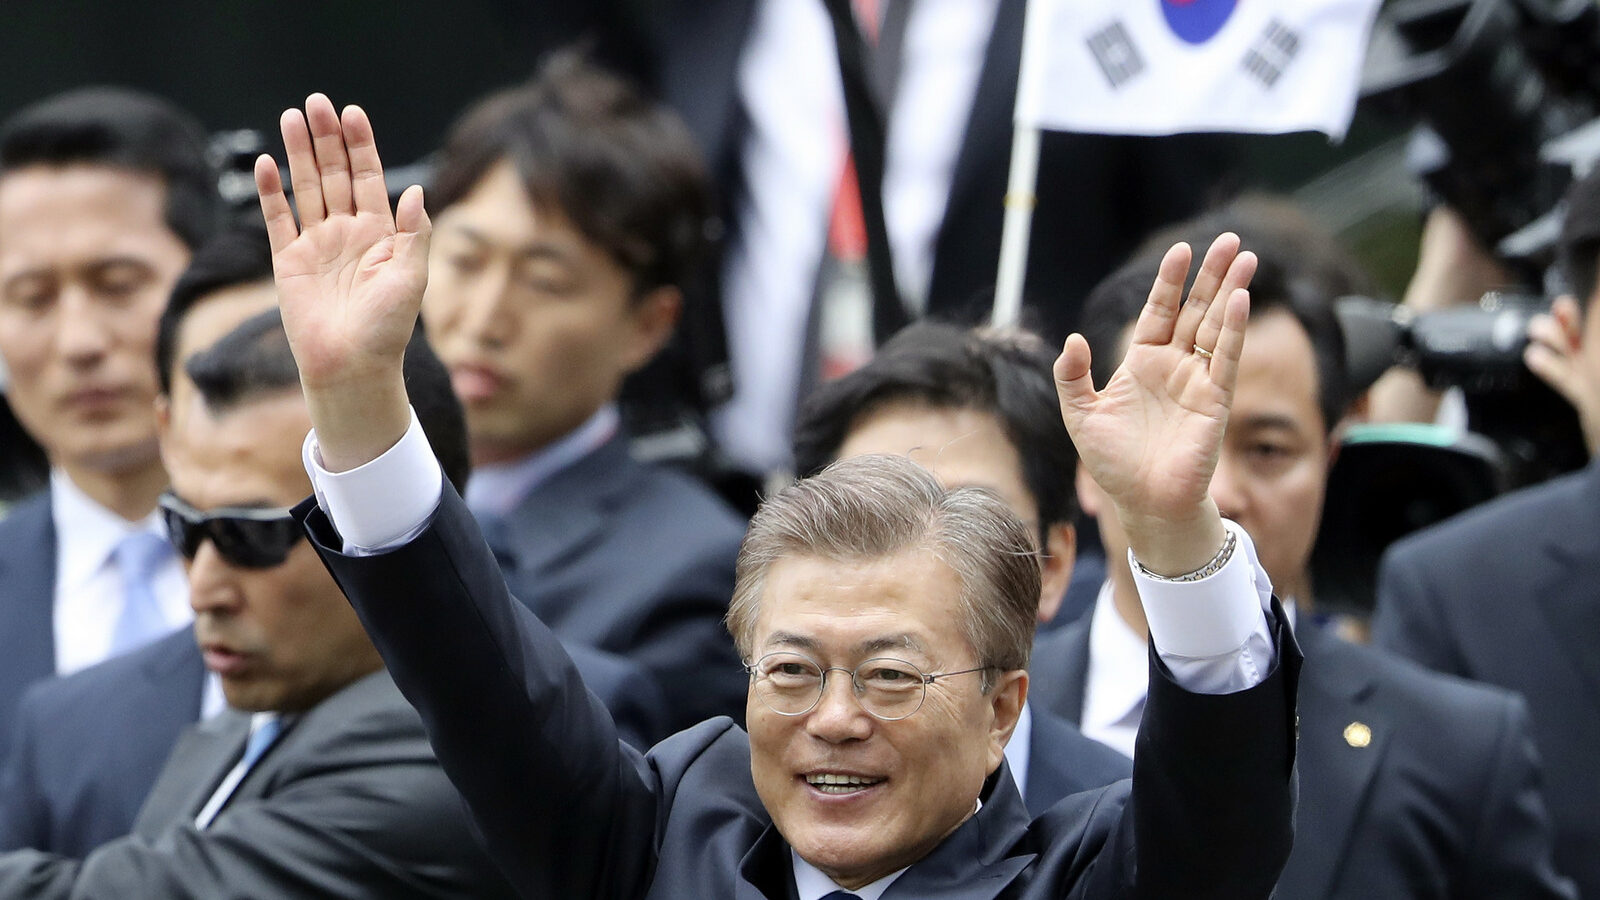 South Korea's new President Moon Jae-in waves to supporters upon his arrival outside the presidential Blue House in Seoul, South Korea, May 10, 2017, (AP/Lee Jin-man)